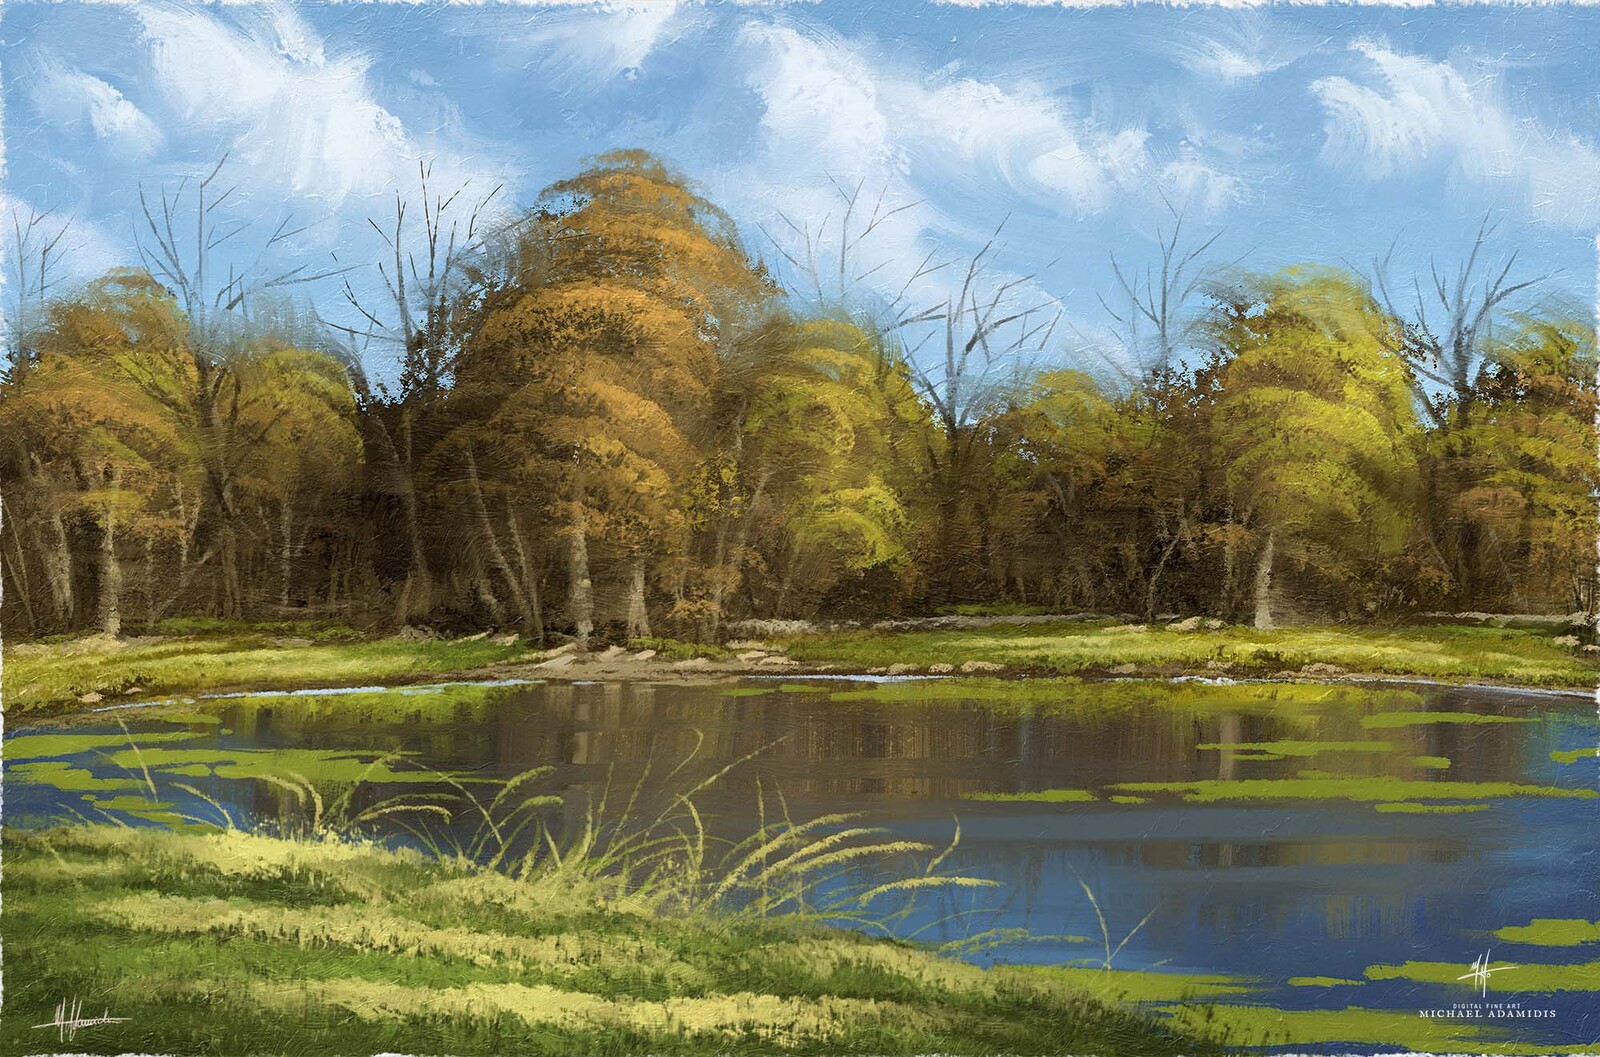 Digital Landscape Painting - "Leaves are Falling"